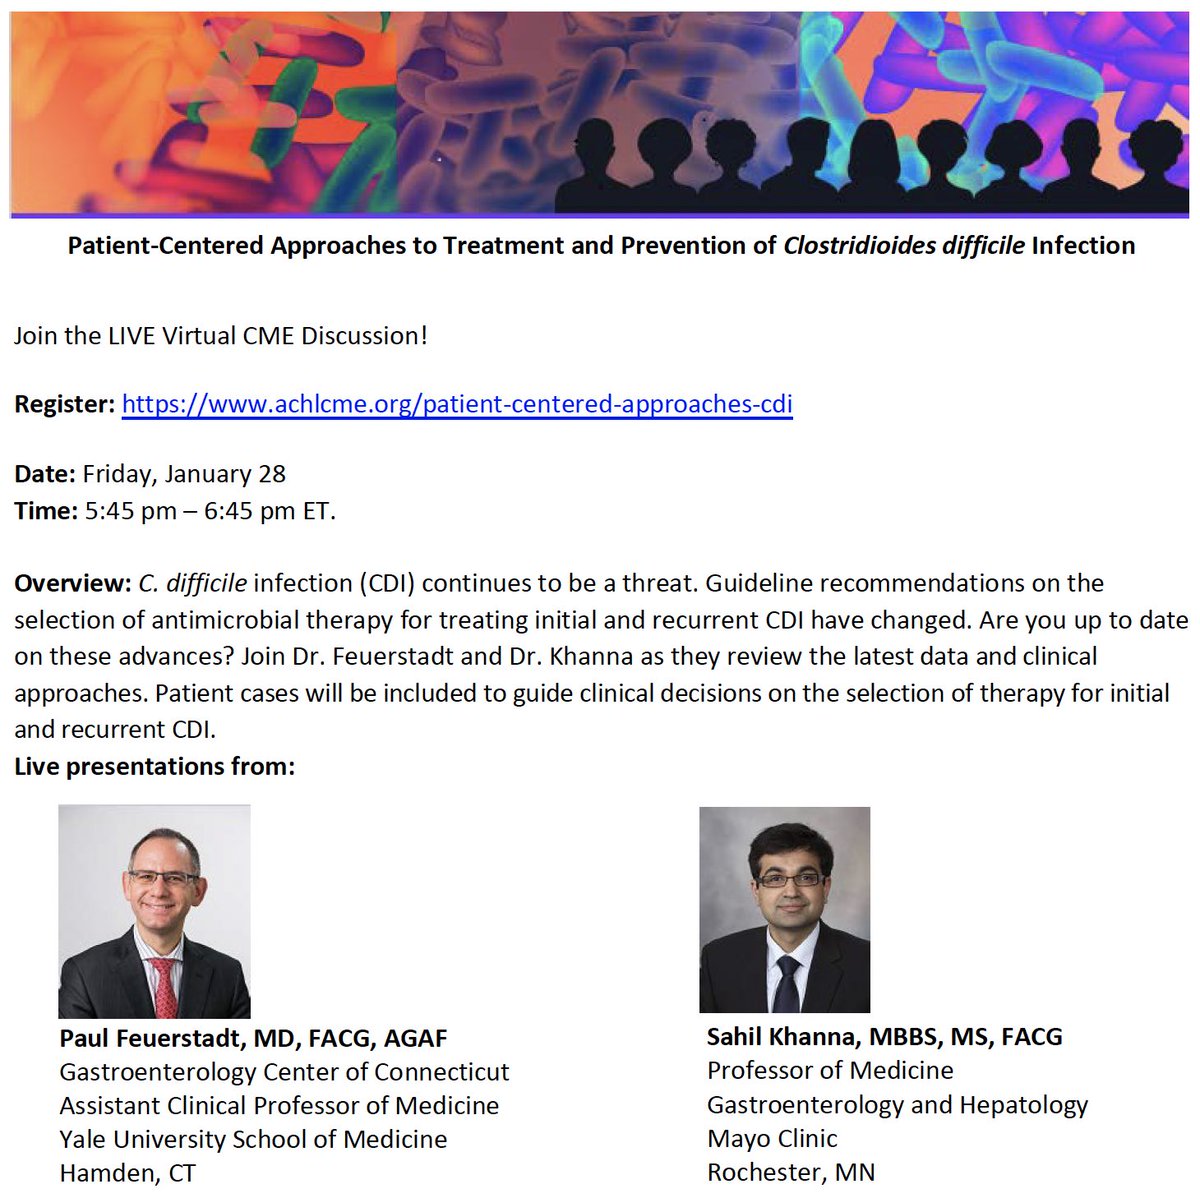 Join @DrPaulGastro and I for an invigorating live virtual #CME on Jan 29th at 1645 CST on Patient-Centered Approaches to Treatment and Prevention of Clostridioides difficile. #Cdiff #FMT #Microbiome #antibiotics @achlcme @cdiffFoundation @jgijournal achlcme.org/patient-center…